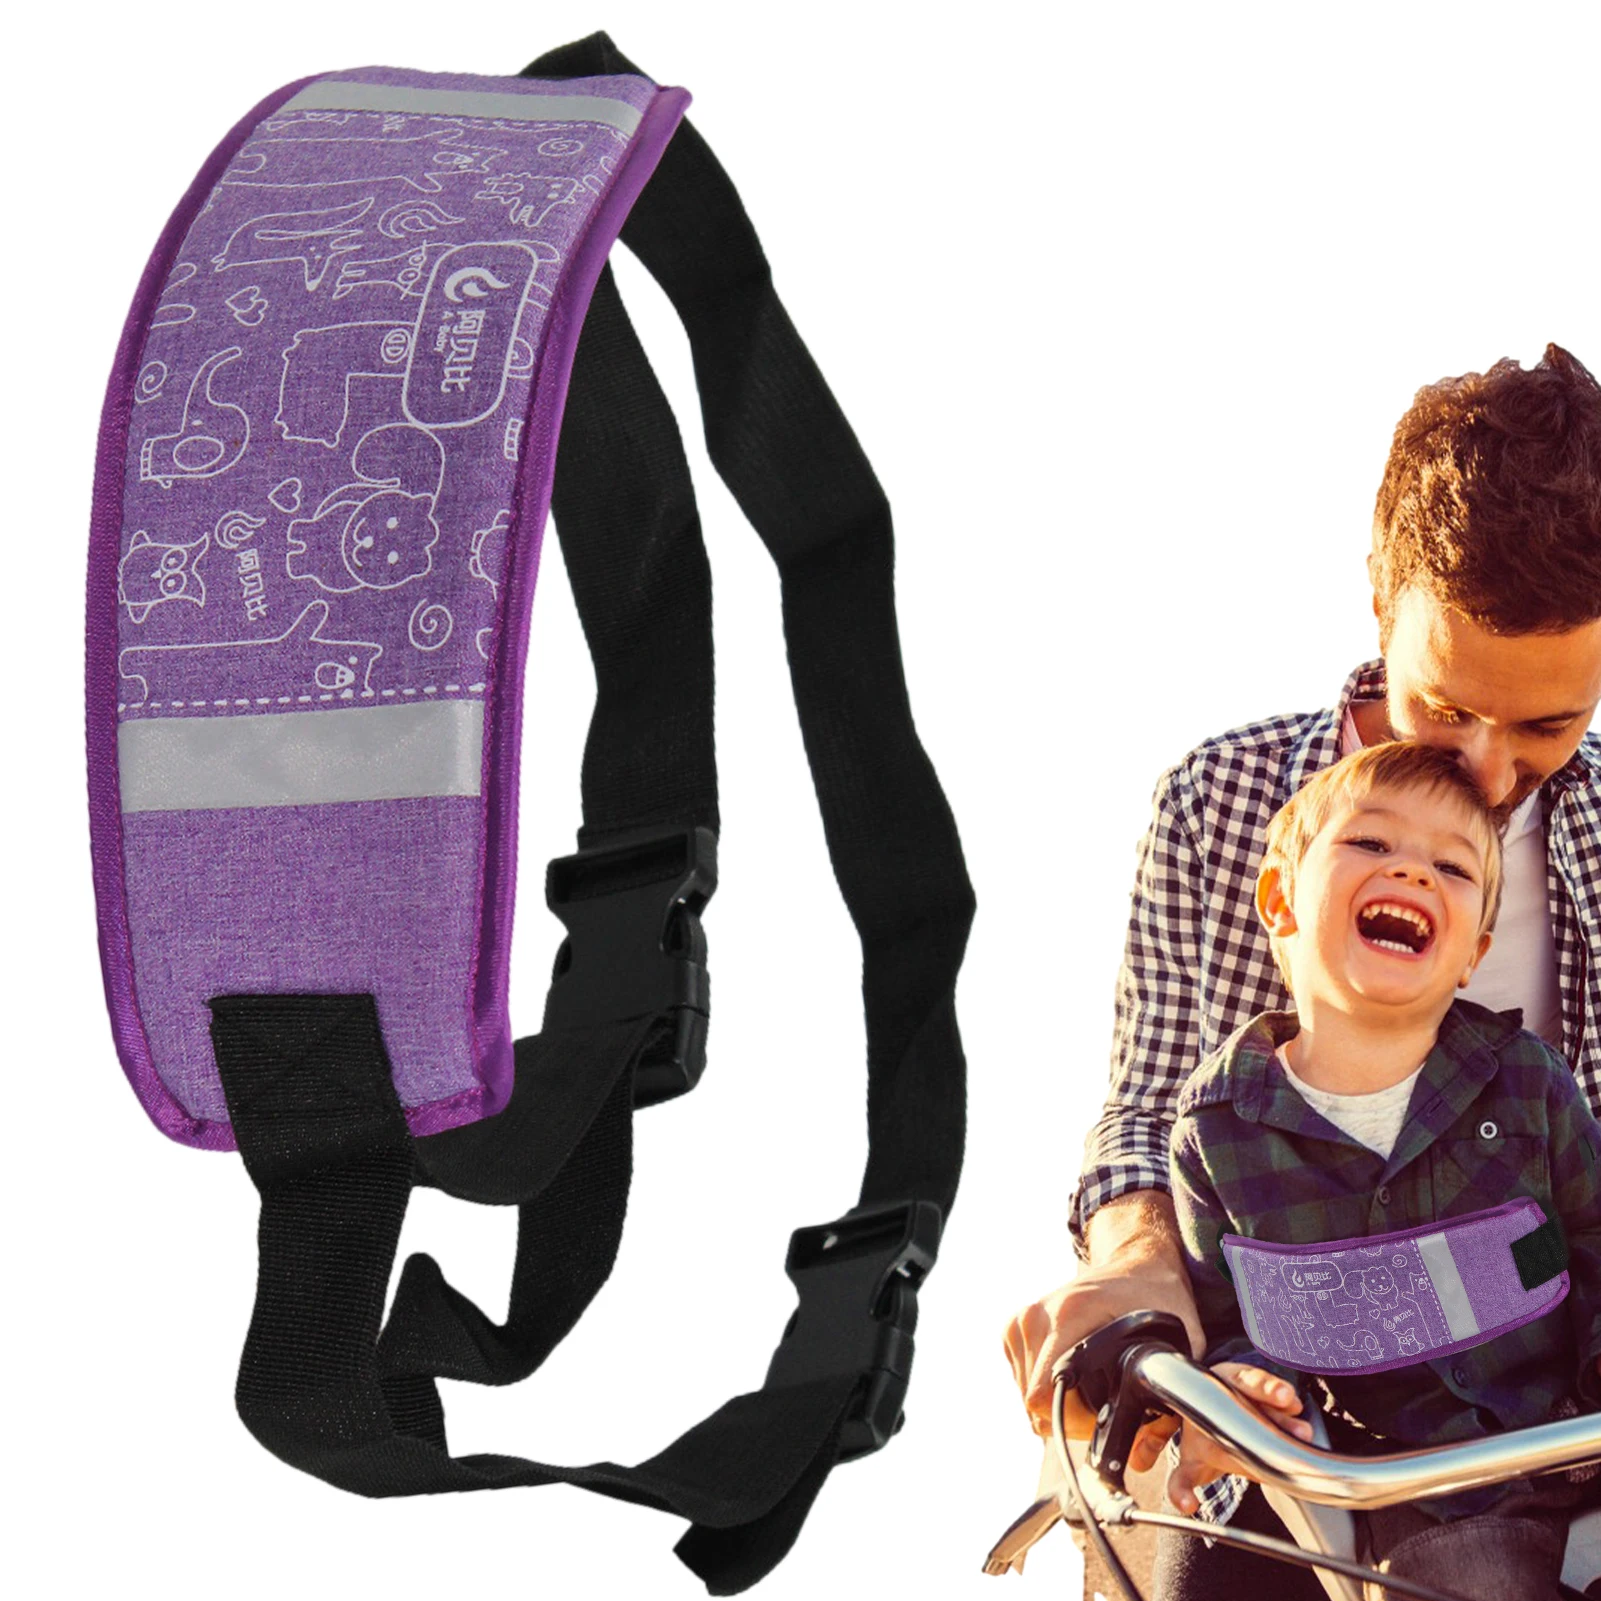 Kids Motorcycle Harness Breathable Motorcycle Rear Seat Safety Belt Non-Slip Strap Motorcycle Seat Strap For Kids Reflective dog harness leash set breathable pet chest strap puppy kitten reflective vest for small medium dogs cats chihuahua walking lead